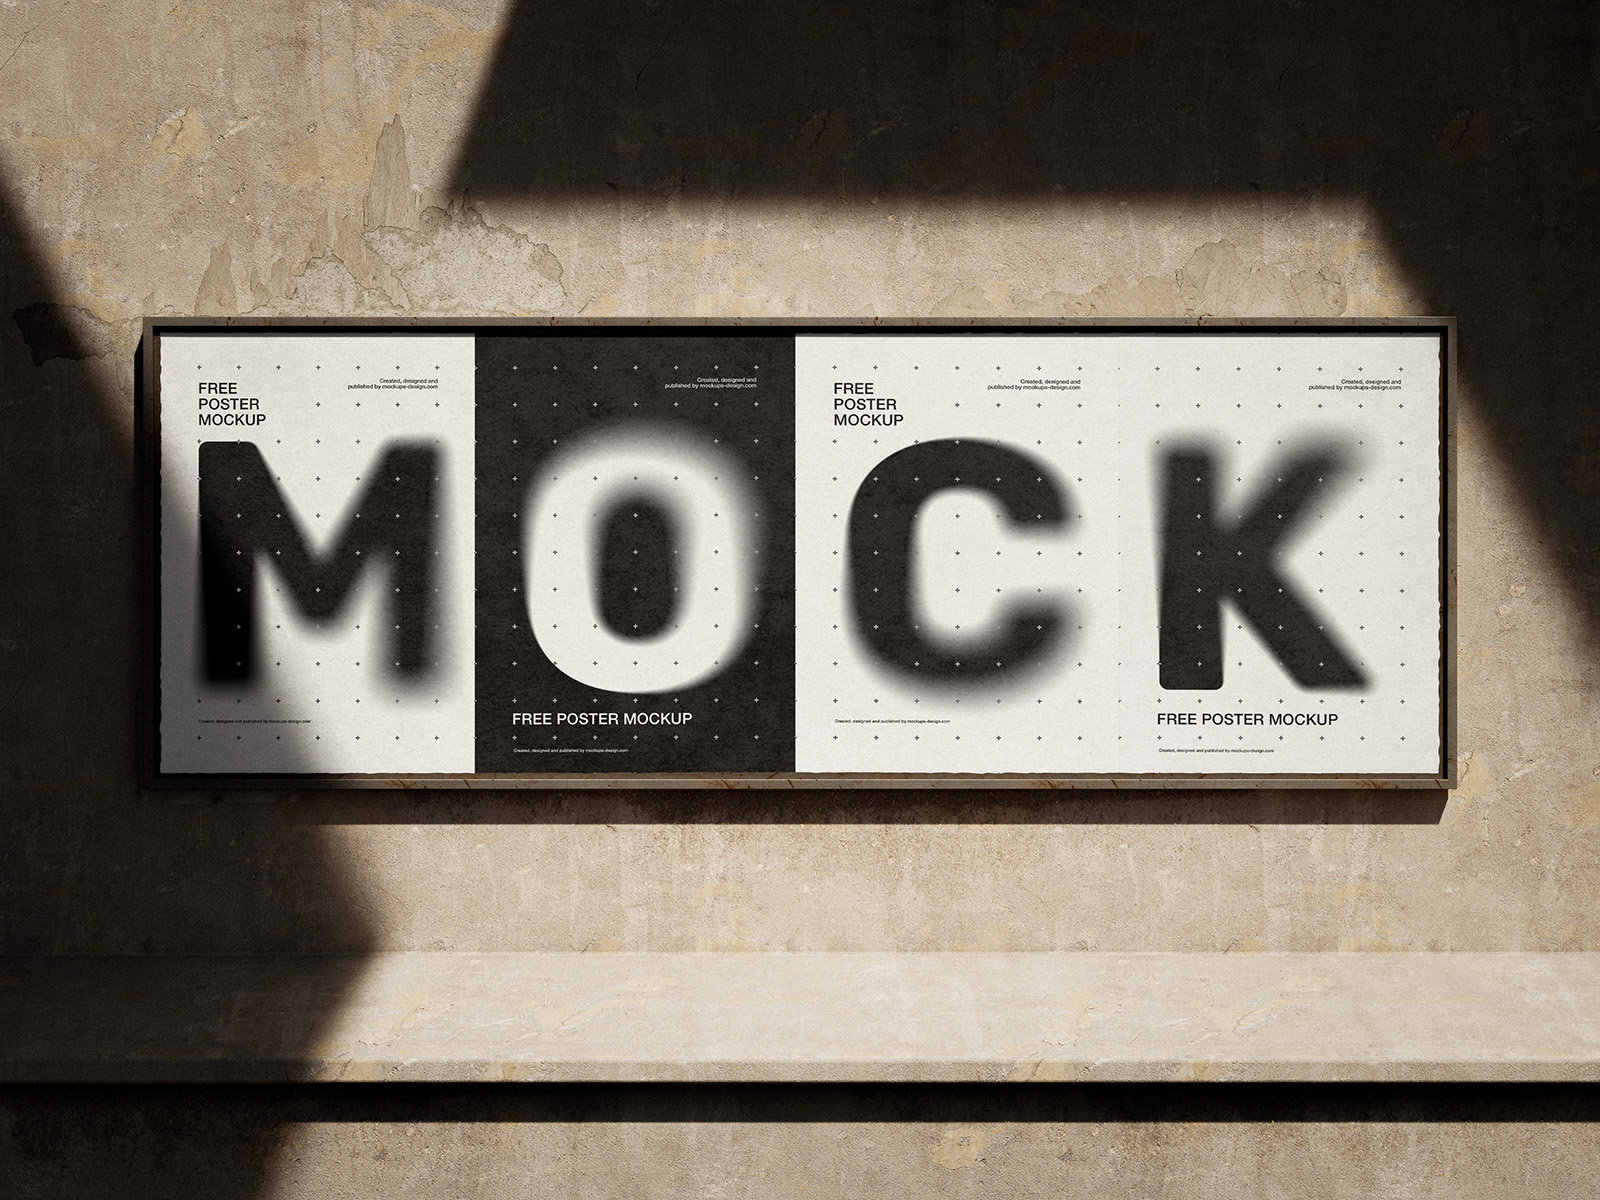 3 Posters Mockup with Metal Frame in Different Sights FREE PSD